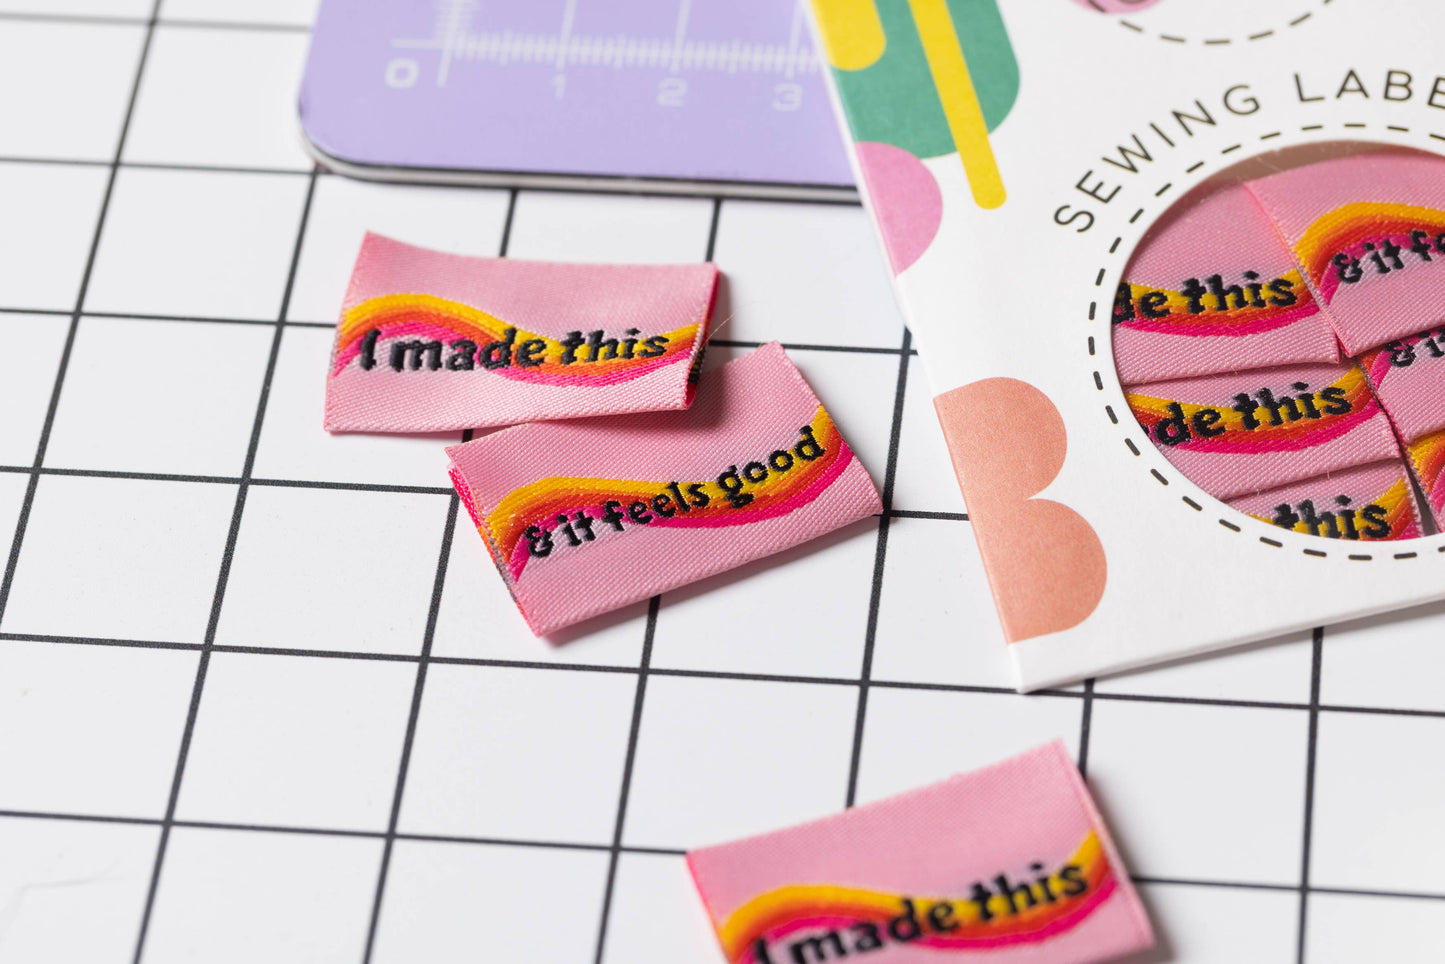 "& It Feels Good" Labels || Pack of 6 Woven Labels